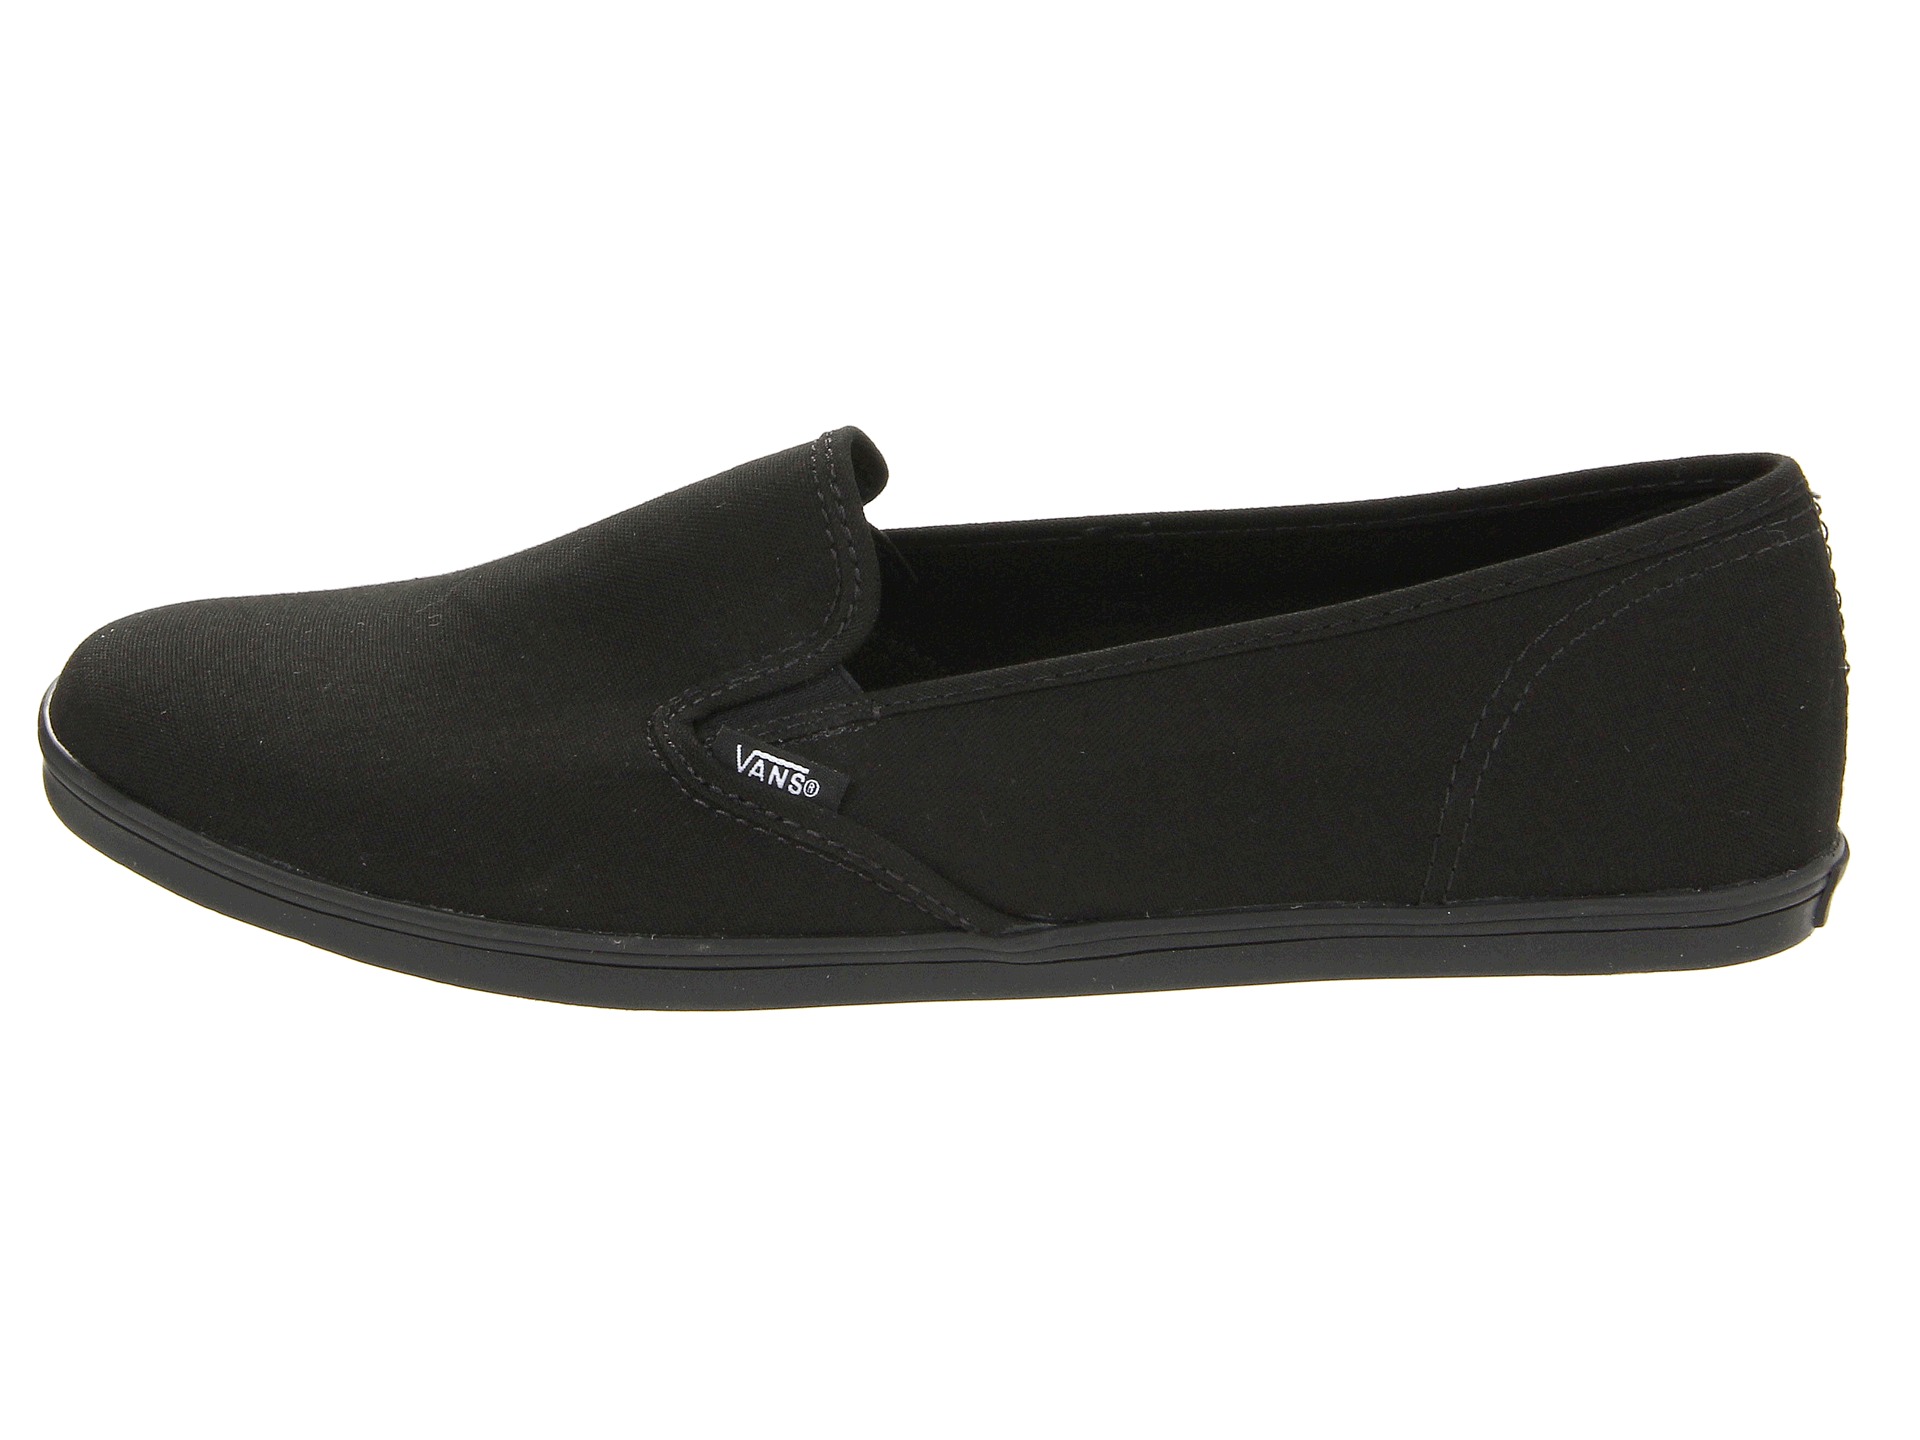 Vans Slip On Lo Pro | Shipped Free at Zappos